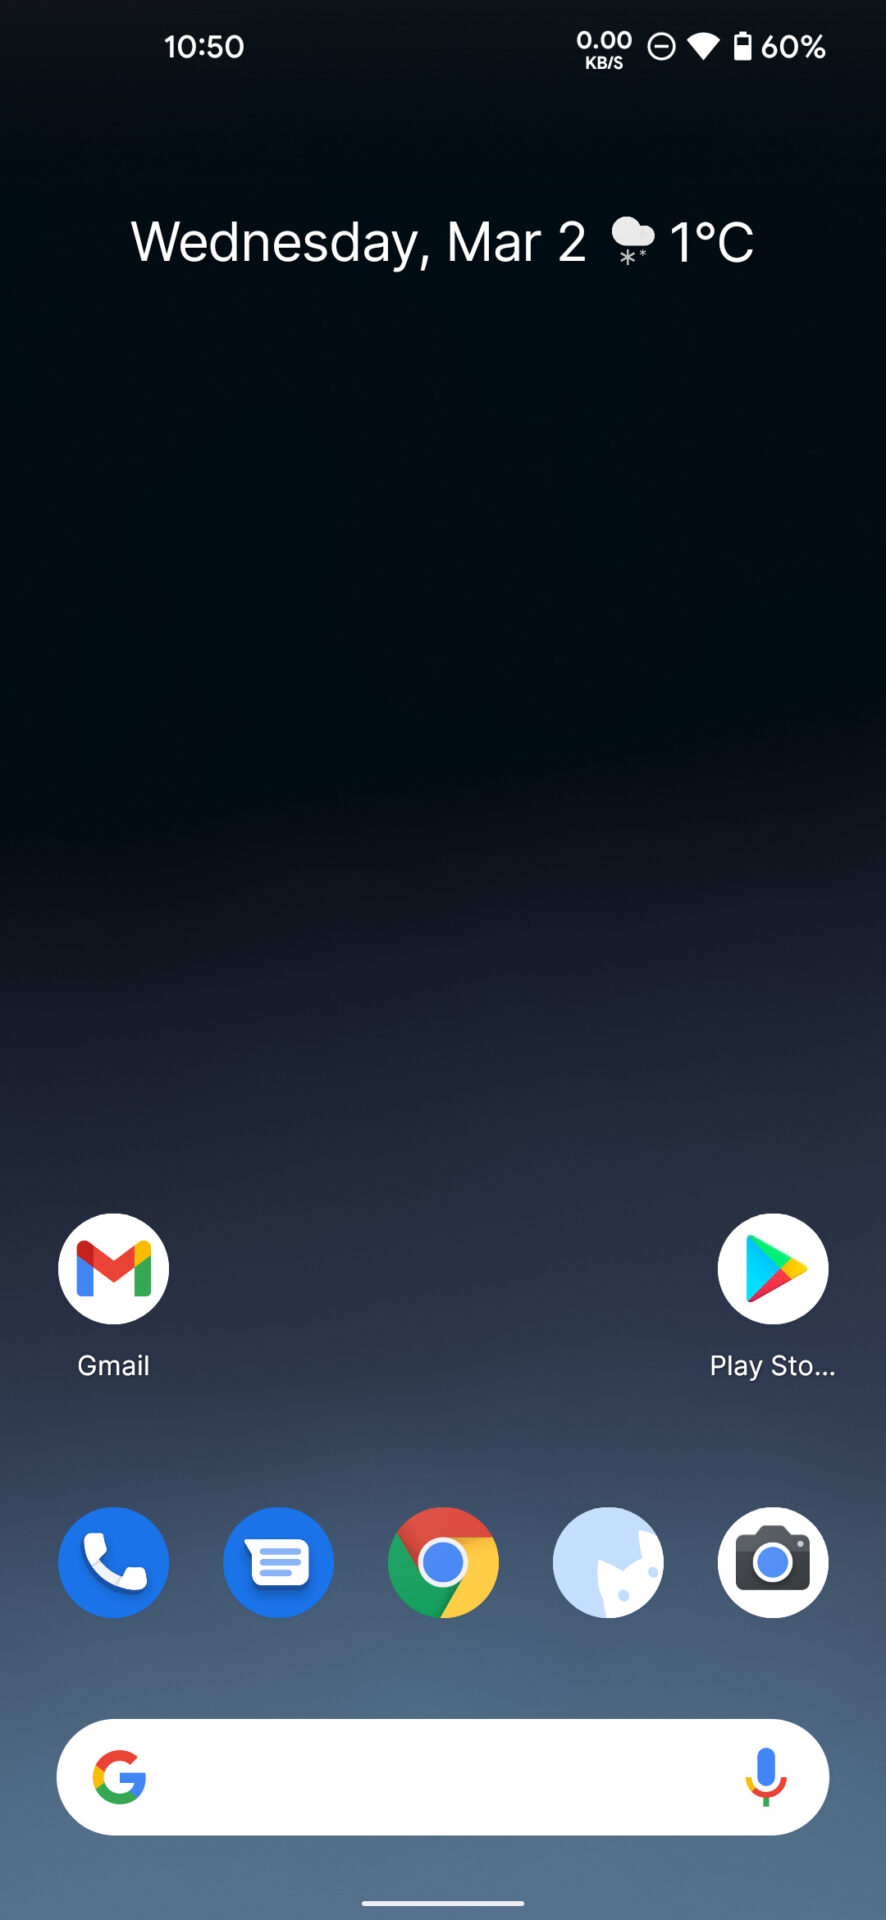 Google Pixel Live Wallpapers (1 to 6